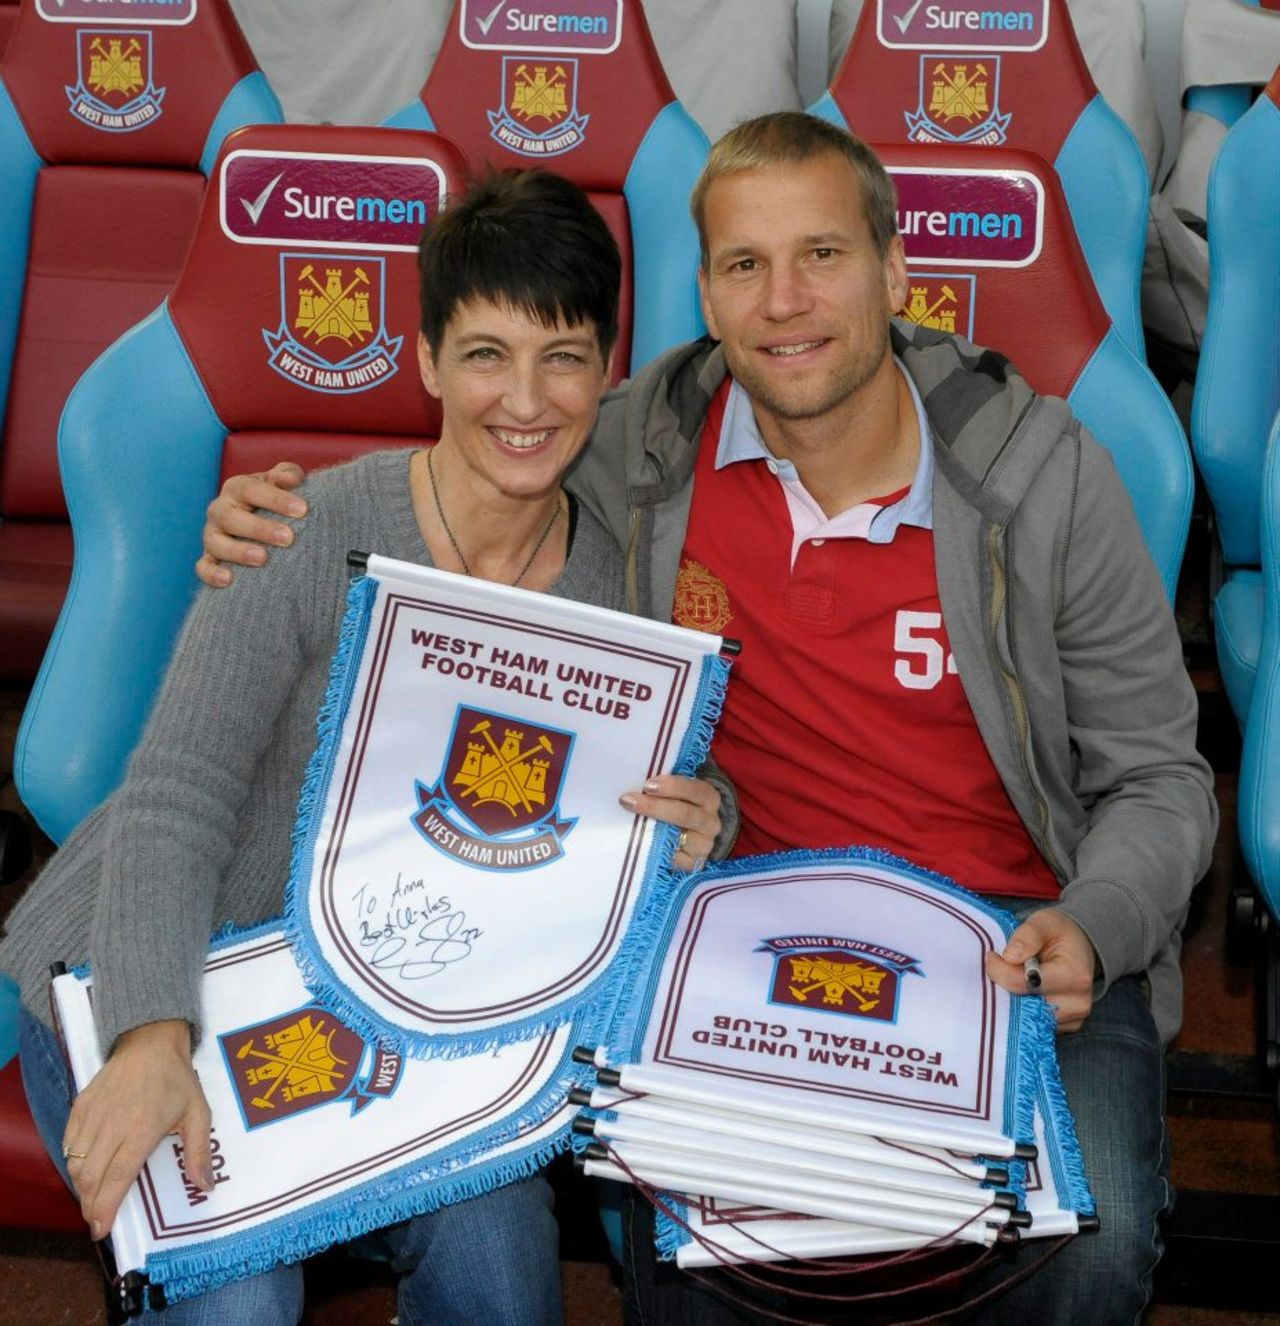 West Ham is just one of the clubs working with Kennedy in her anti-bullying campaign. The Premier League club has also provided training sessions for autistic children.